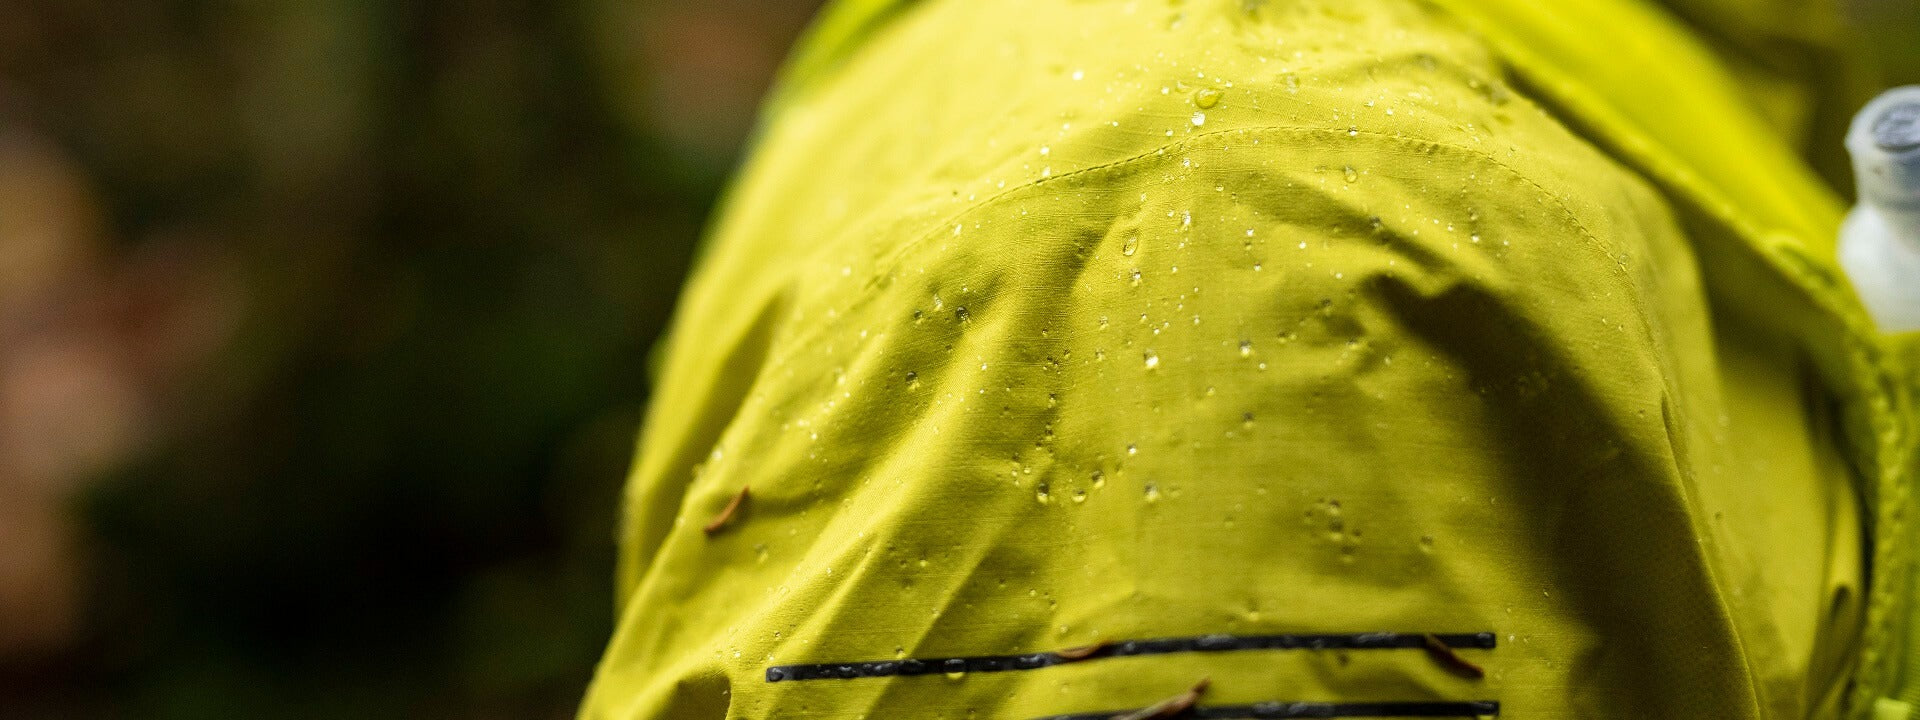 How to wash waterproof clothing